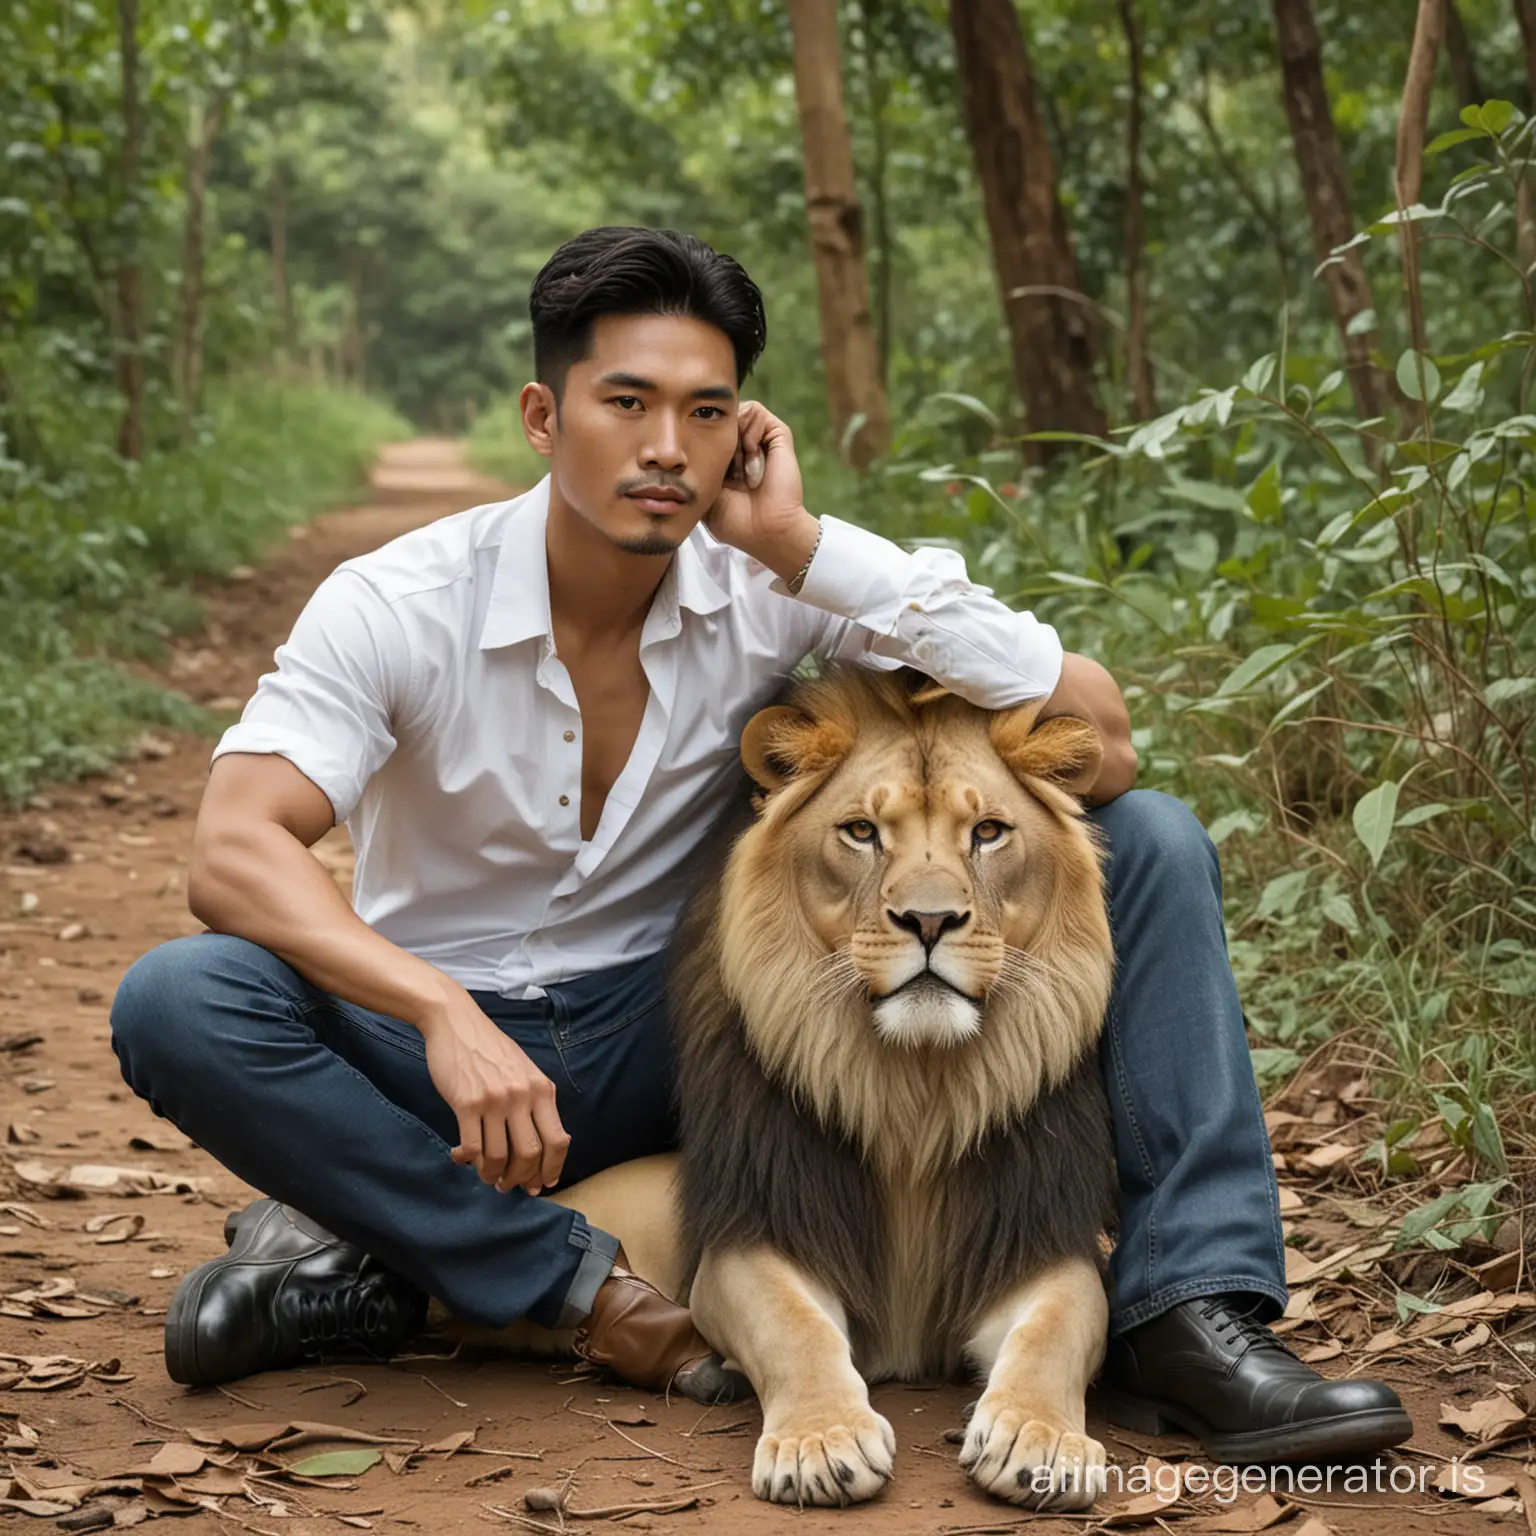 Stylish-Korean-Indonesian-Man-Poses-with-Majestic-Lion-in-Forest-Scene